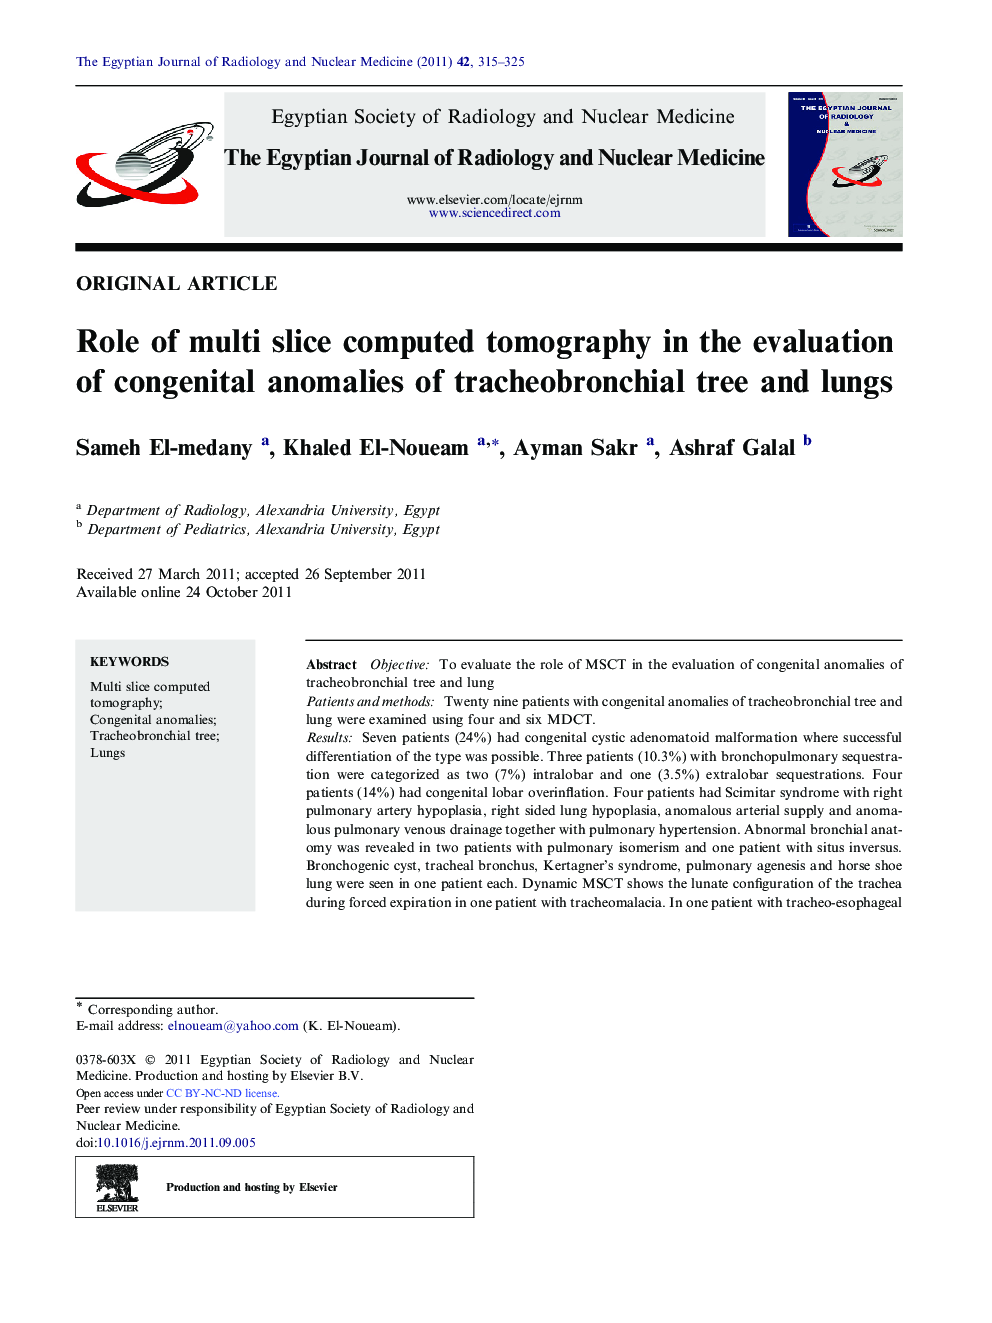 Role of multi slice computed tomography in the evaluation of congenital anomalies of tracheobronchial tree and lungs 